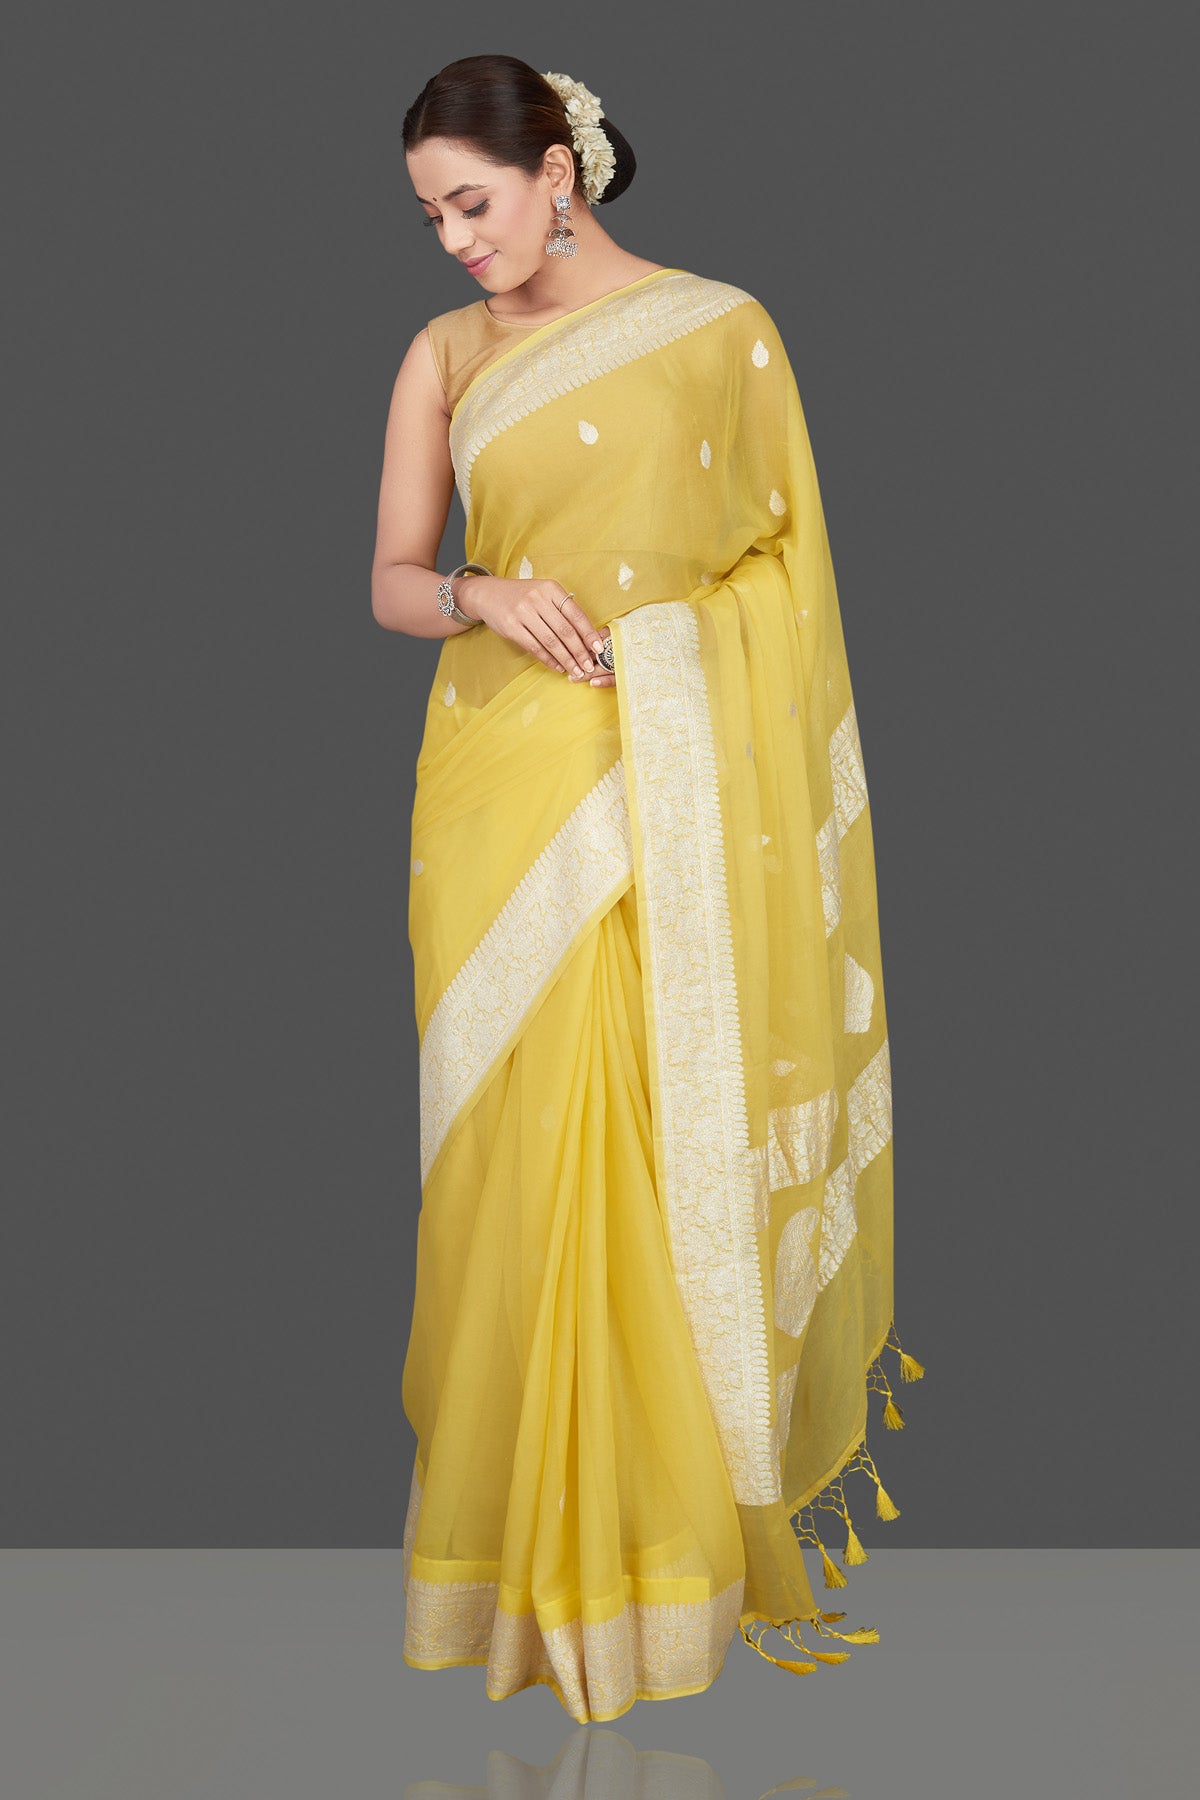 Shop charming yellow color chiffon georgette saree online in USA with silver zari border. Go for stunning Indian designer sarees, georgette sarees, handwoven saris, embroidered sarees for festive occasions and weddings from Pure Elegance Indian clothing store in USA.-side